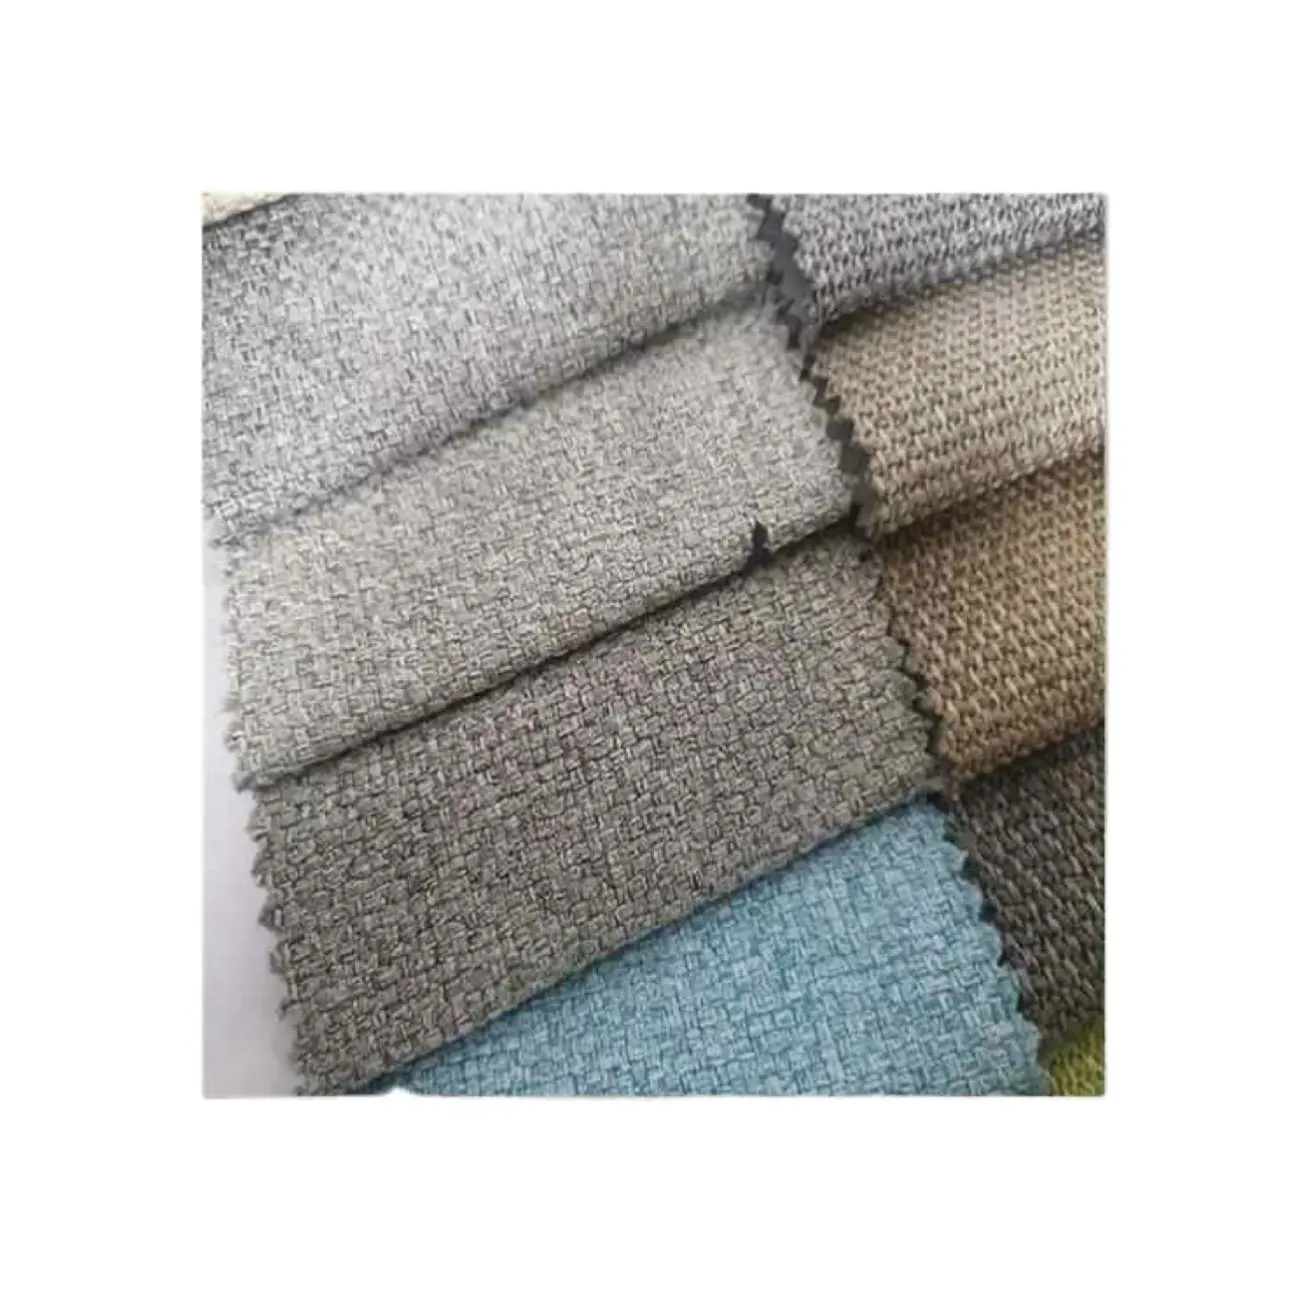 Invest in wholesale home textile products crafted from premium polyester fiber sand issued linen.